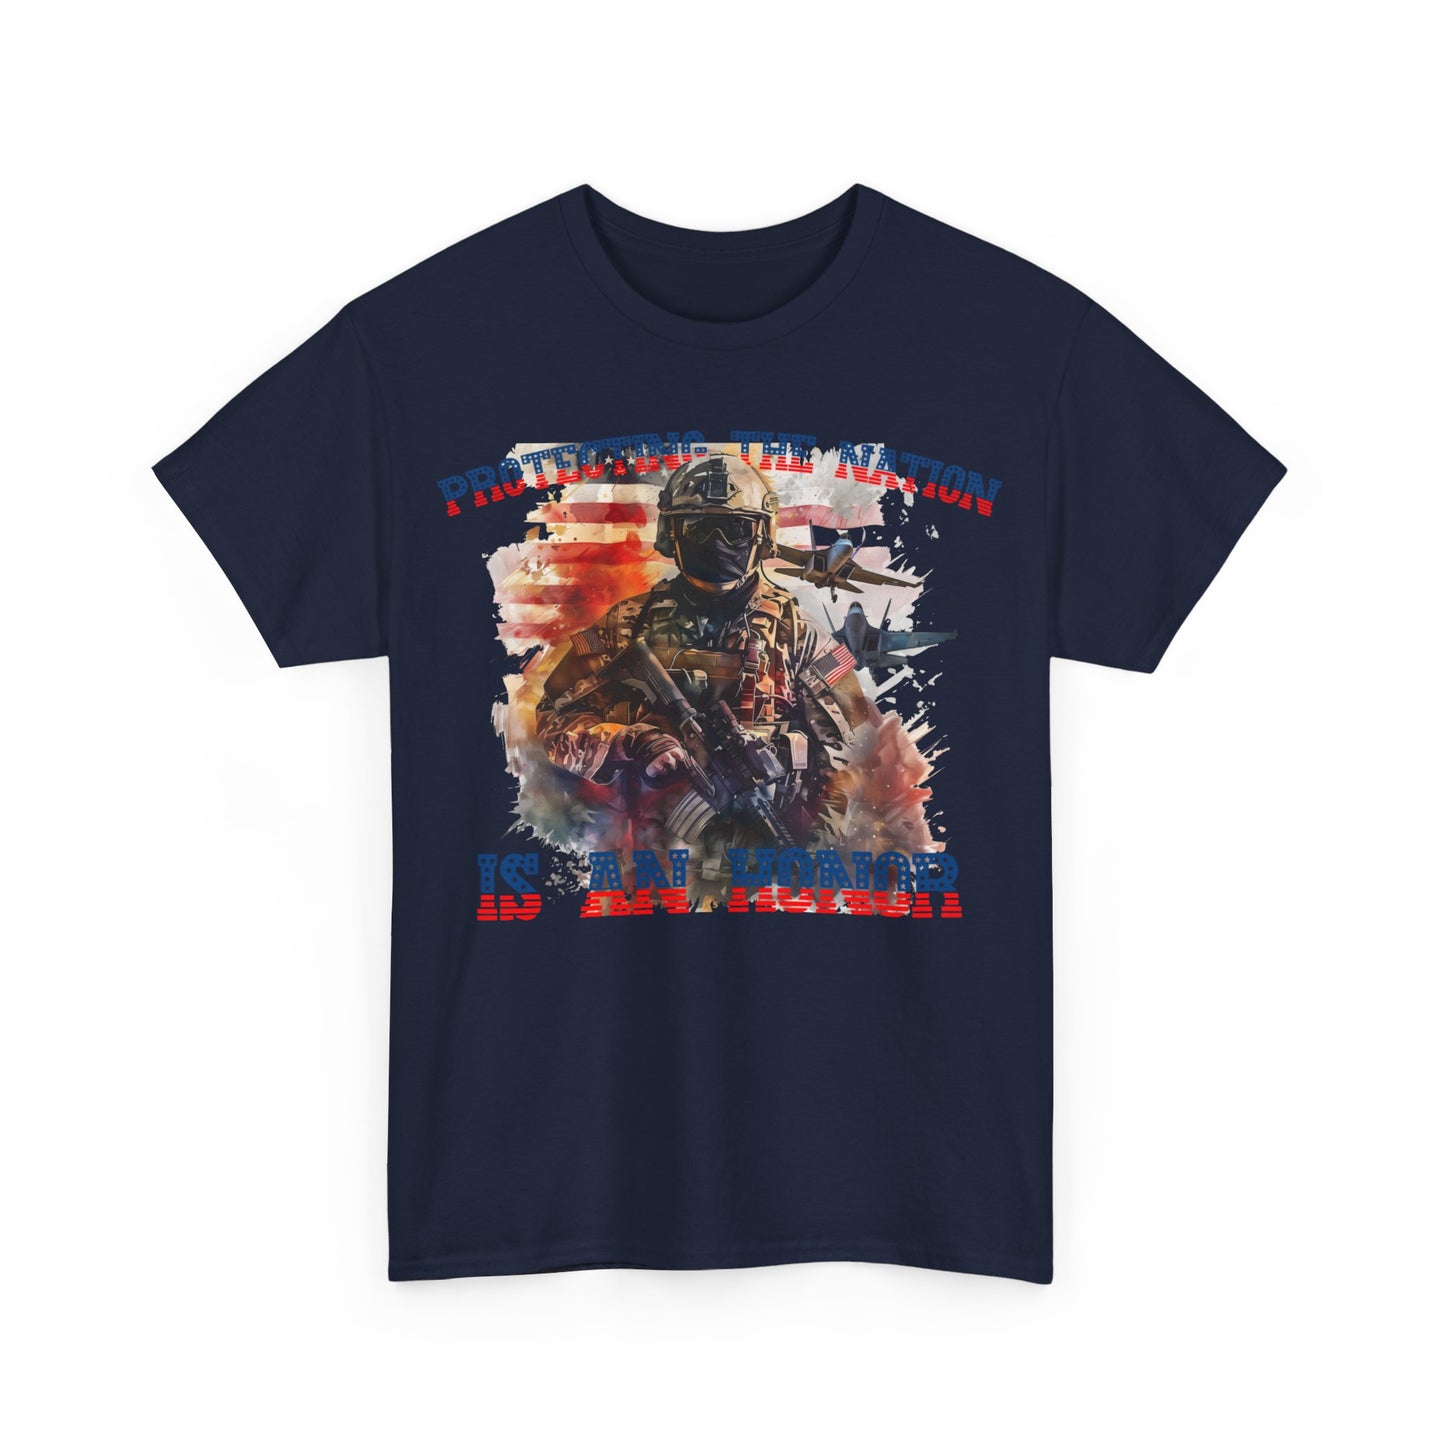 Military Personnel 'Protecting the nation is an honor' High Quality Printed Unisex Heavy Cotton T-Shirt